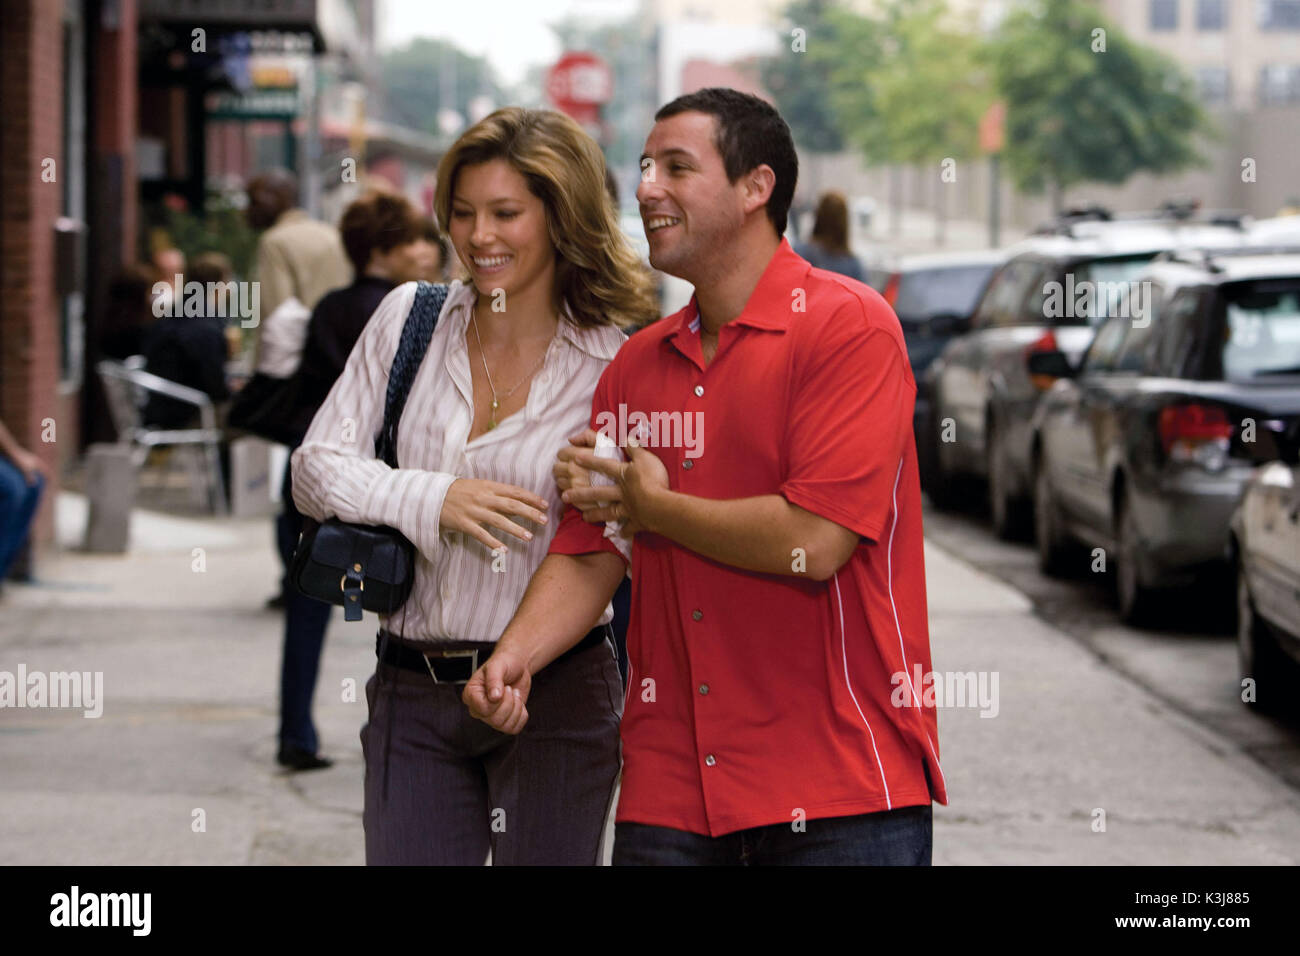 JESSICA BIEL and ADAM SANDLER star in the comedy I Now Pronounce You Chuck and Larry. I NOW PRONOUNCE YOU CHUCK & LARRY JESSICA BIEL, ADAM SANDLER Stock Photo